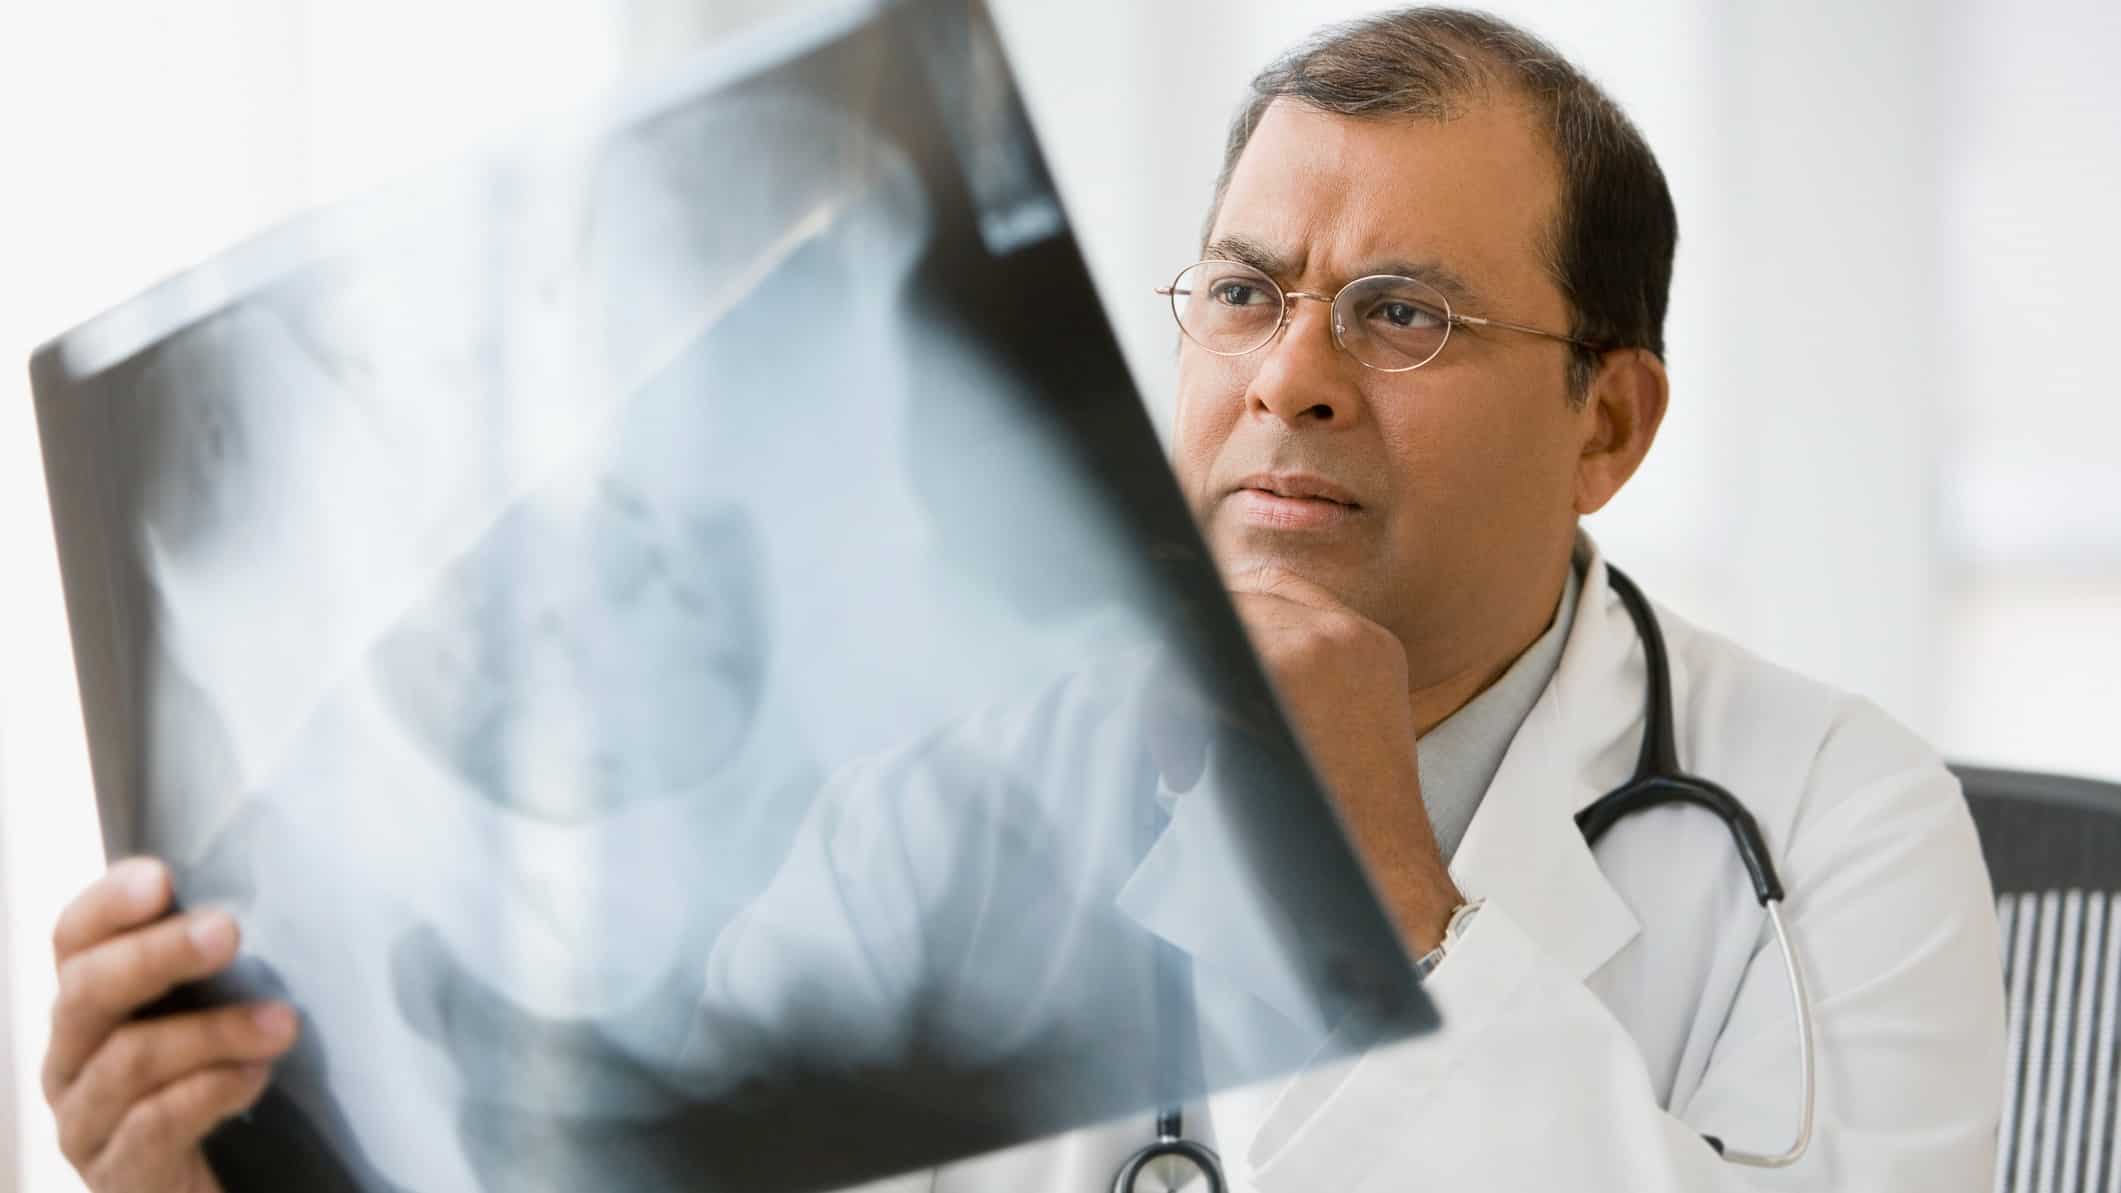 a concerned medical doctor examines an Xray from an imaging machine in a hospital setting.